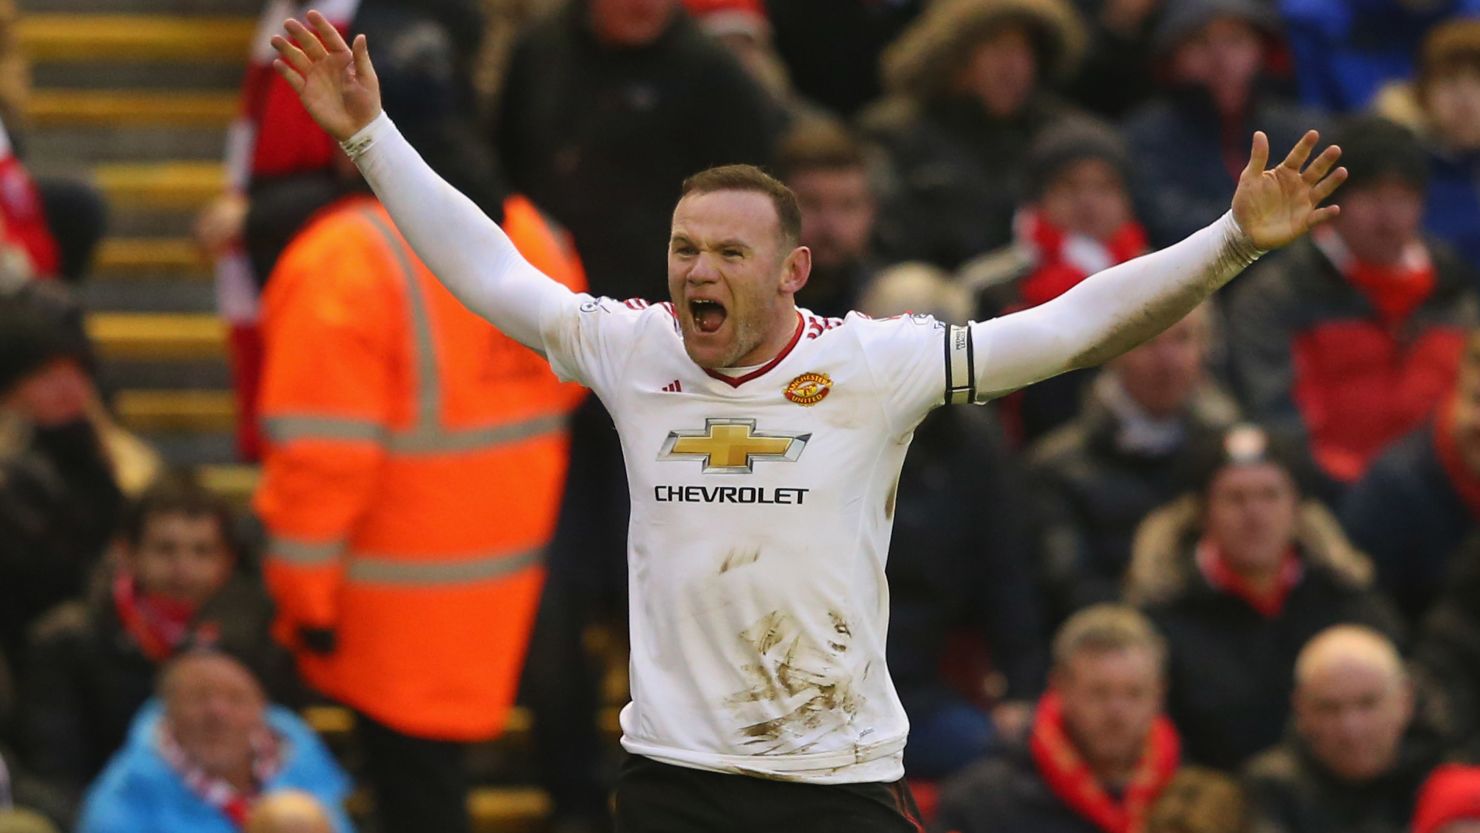 Rooney celebrates after scoring the winning goal for Manchester United during Sunday's English Premier League stand off against Liverpool, reaching a record-breaking 176 goals for the club.